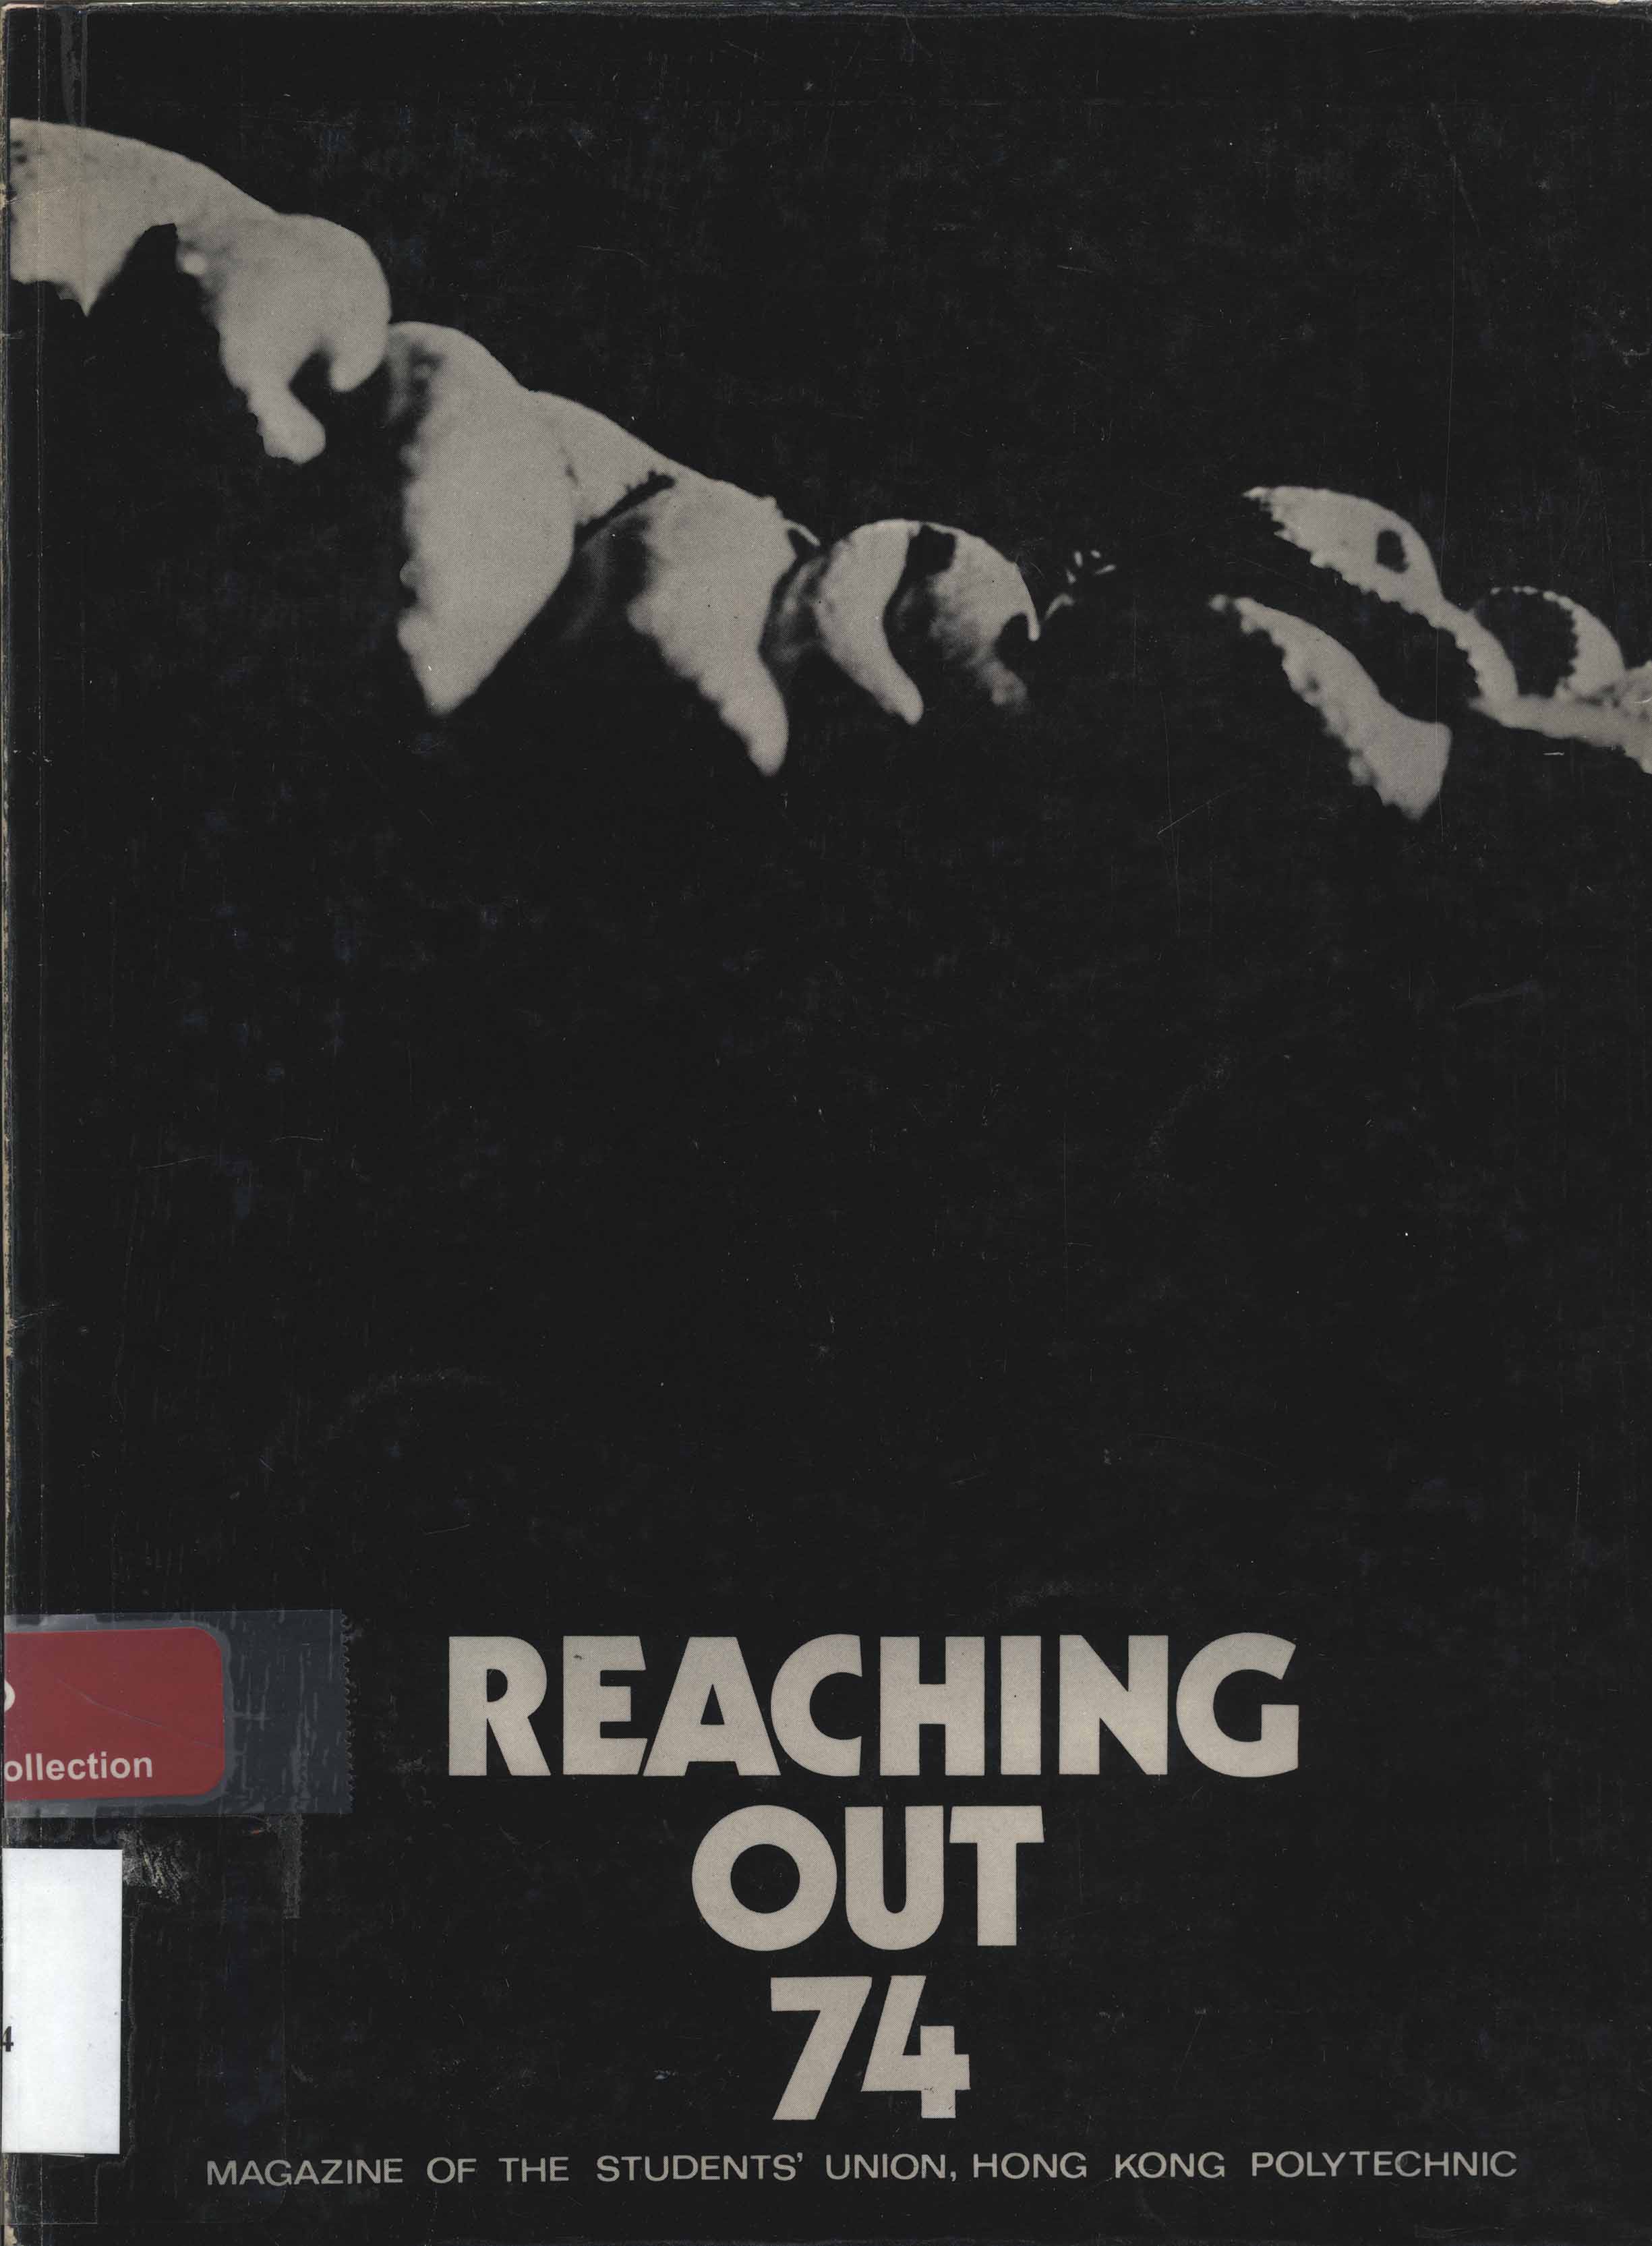 Reaching out 1974